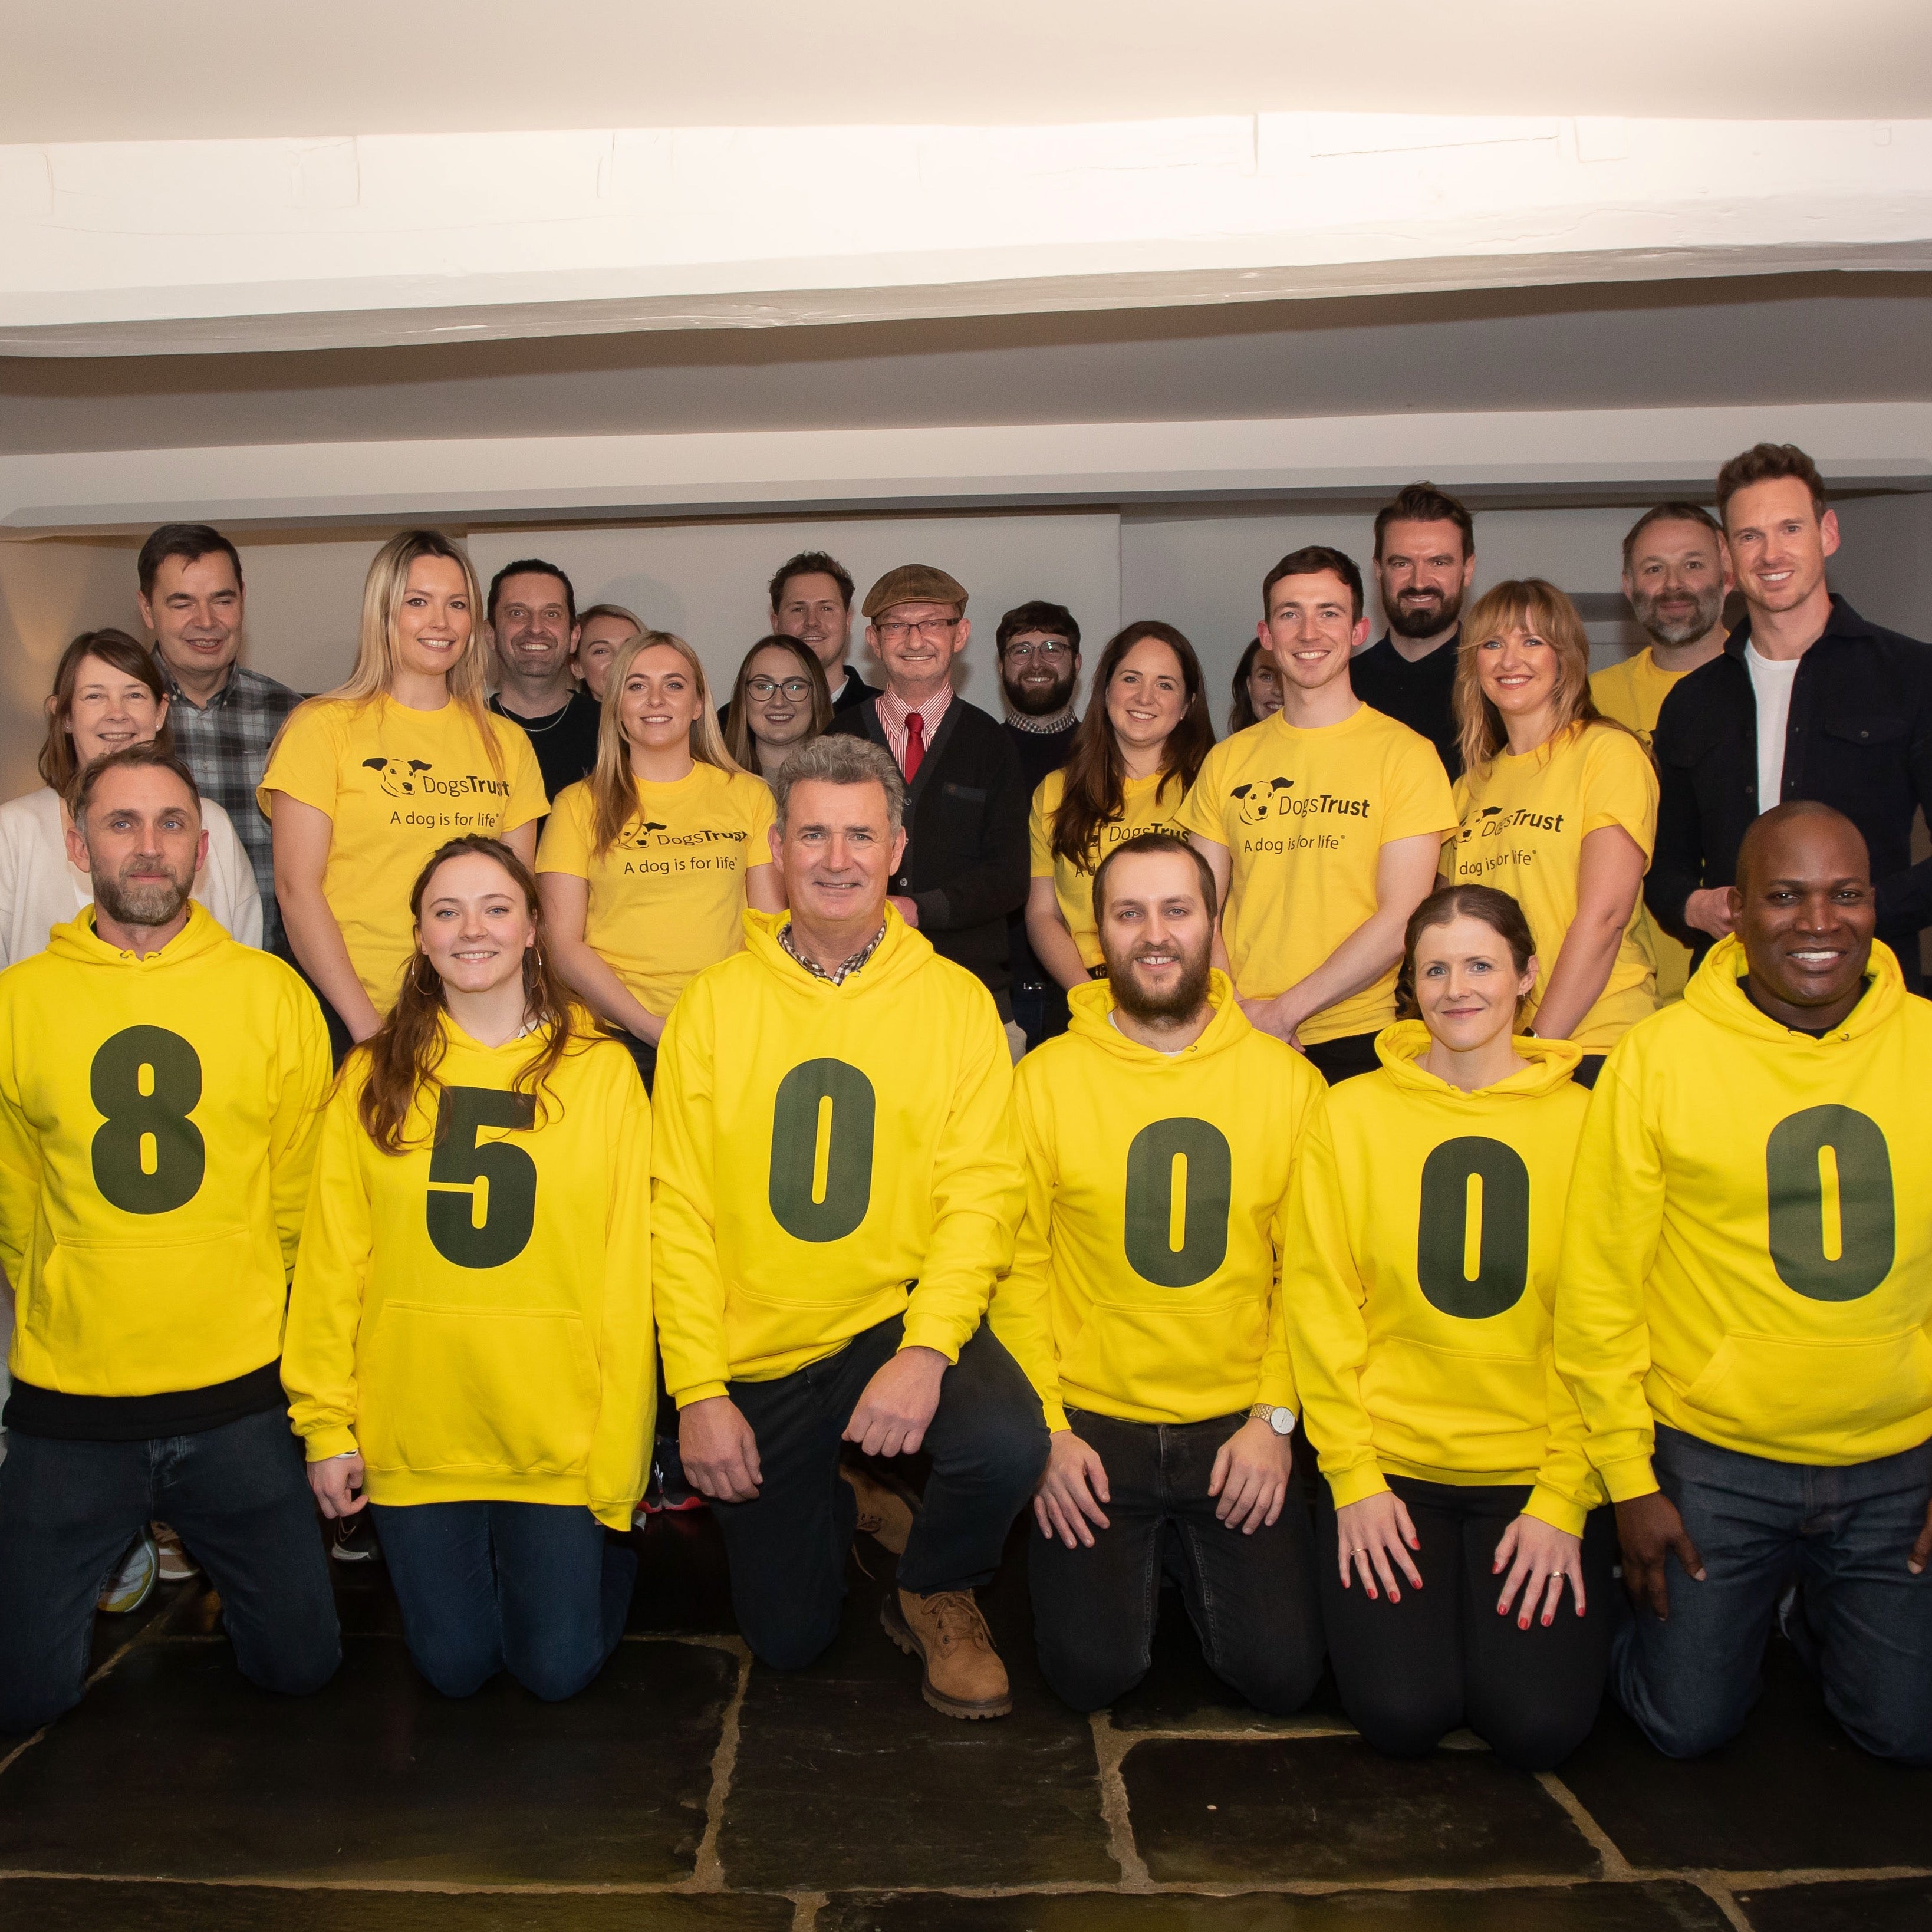 Together We Raised £850,000 for Dogs Trust